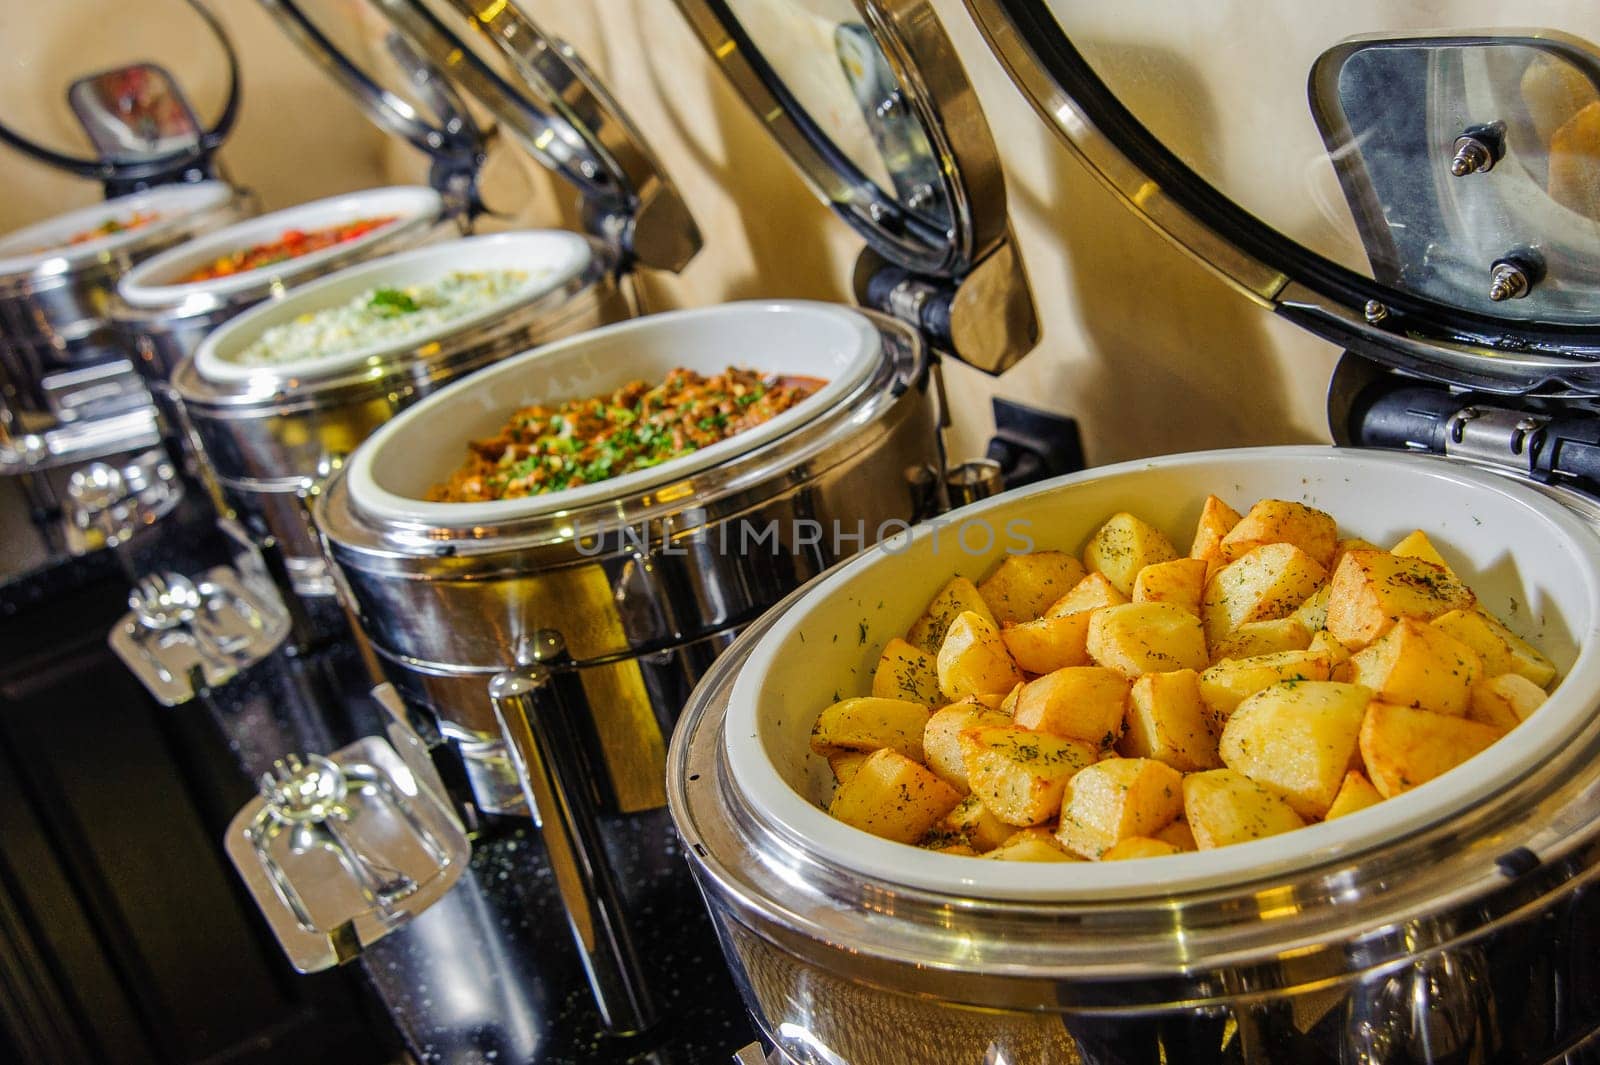 A buffet table with containers full of potato and meat dishes